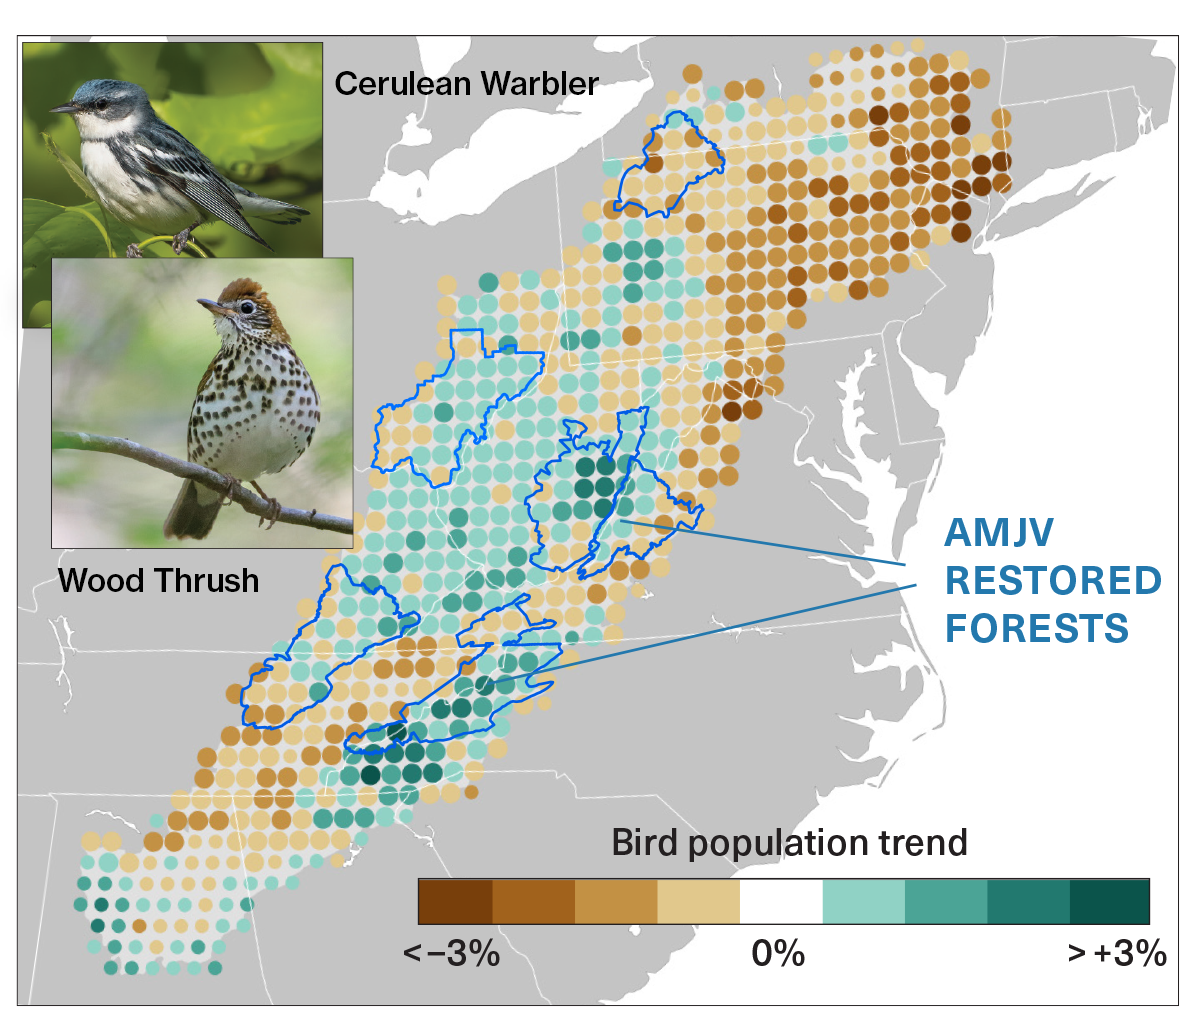 map showing bird population trends compared to joint venture lands. inset photos of two songbirds, a cerulean warbler and a wood thrush